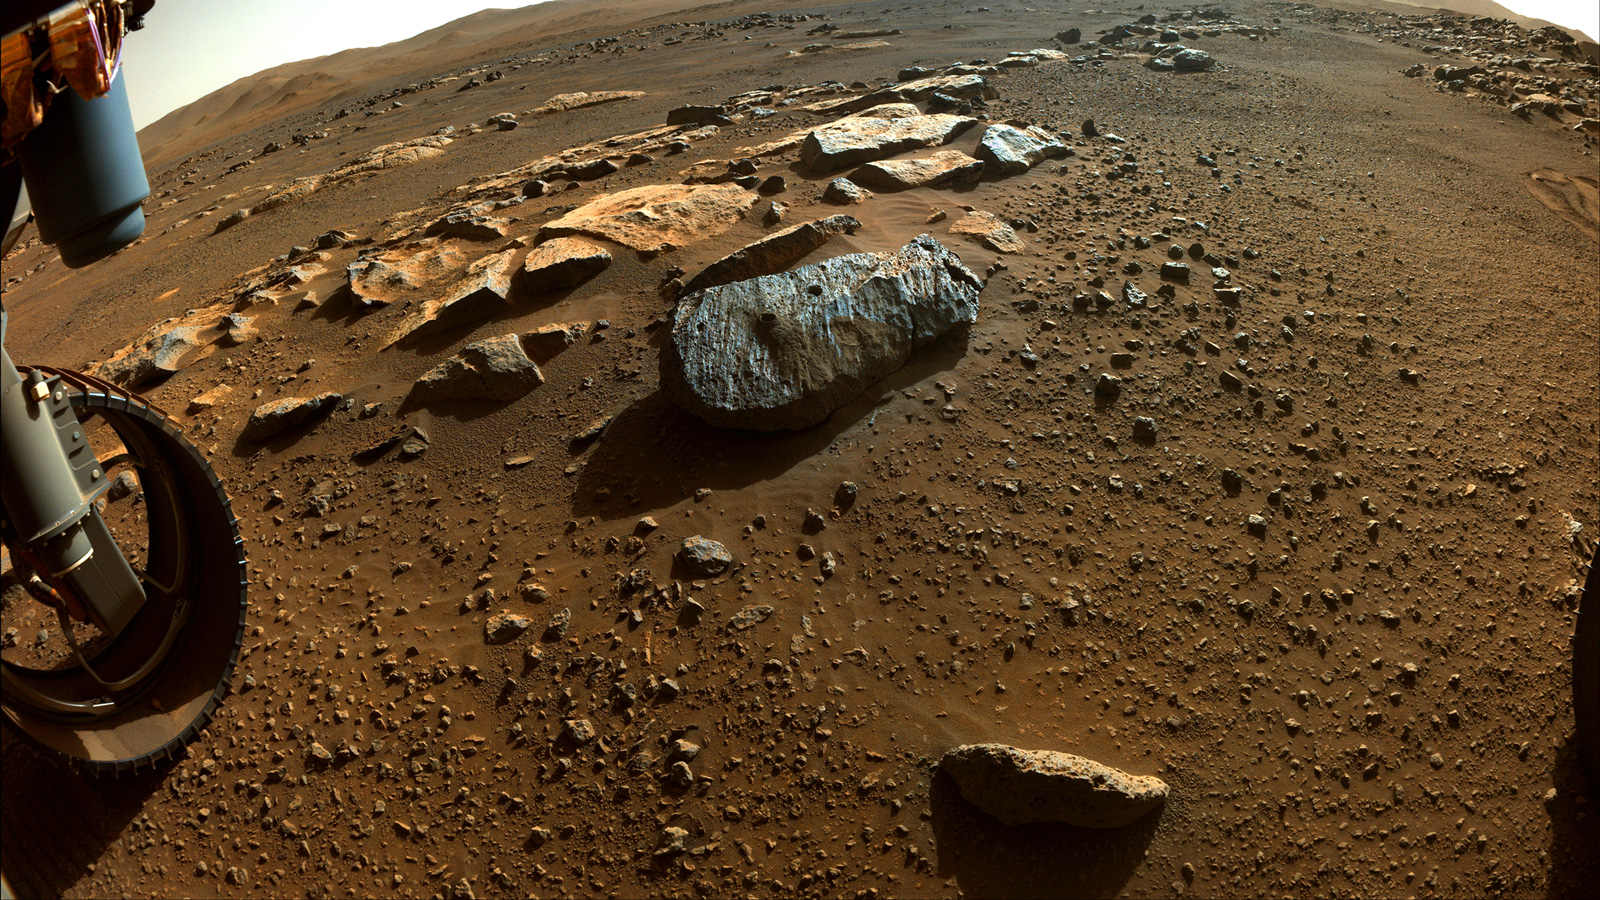 slide 4 - Image of rocks the rover has analyzed for sample collection